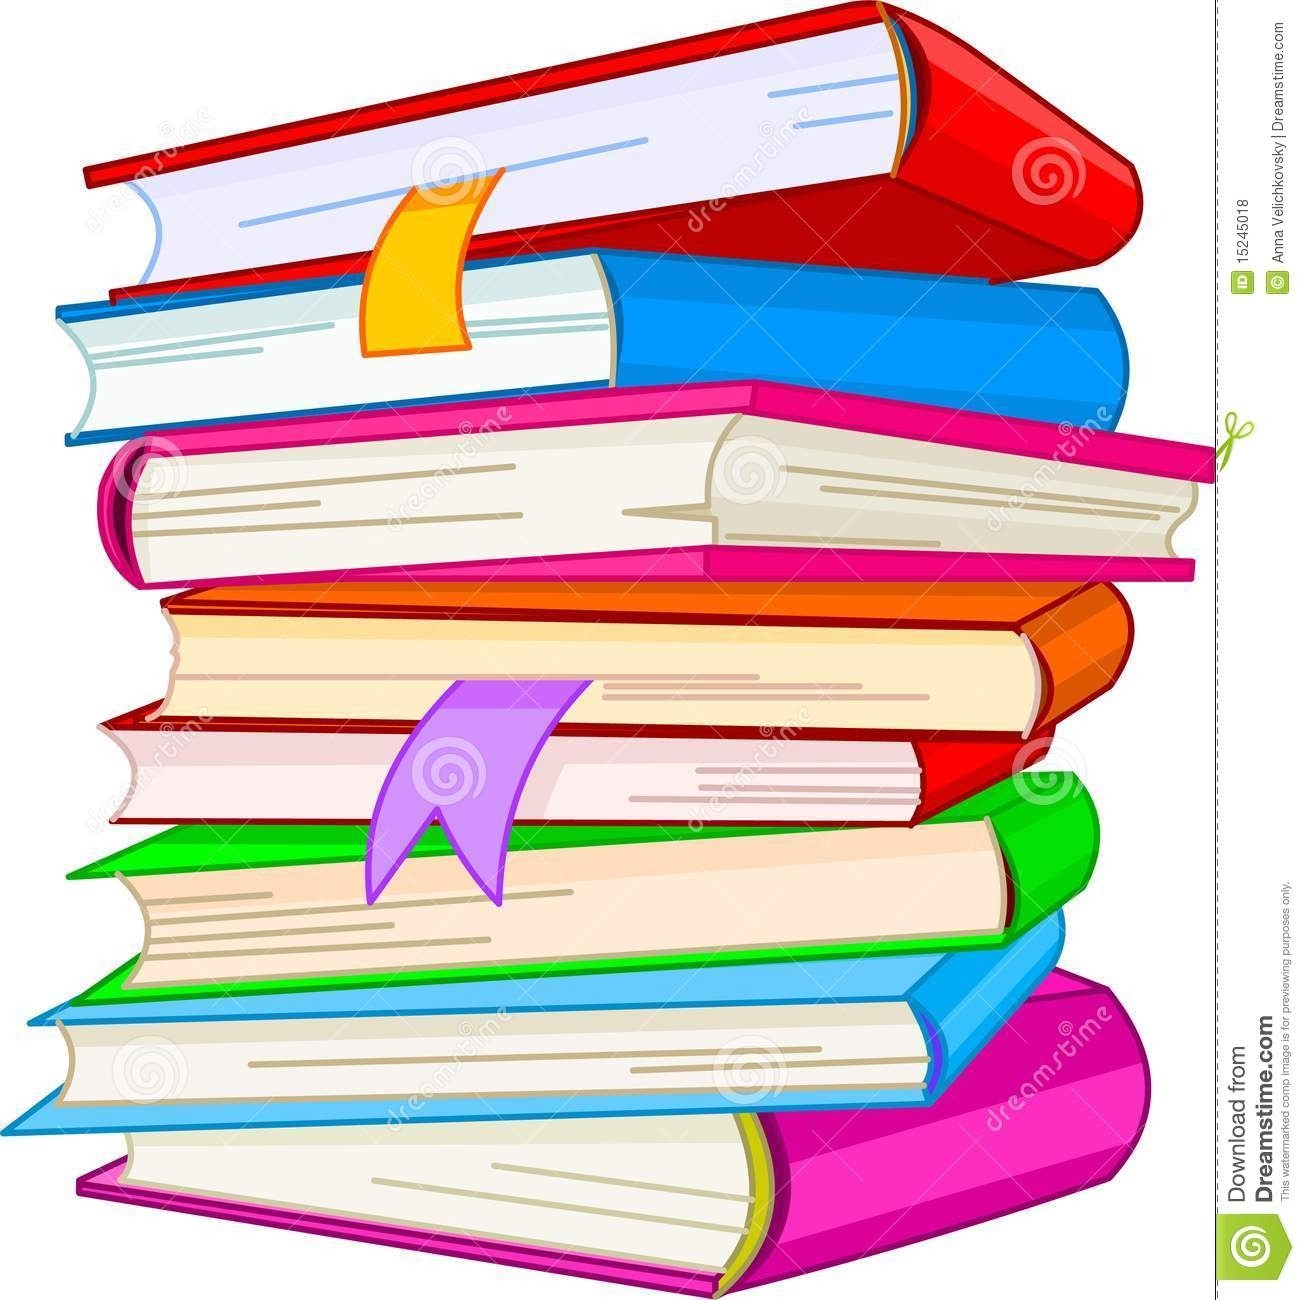 Books clip art pile book free images with tall stack jpg